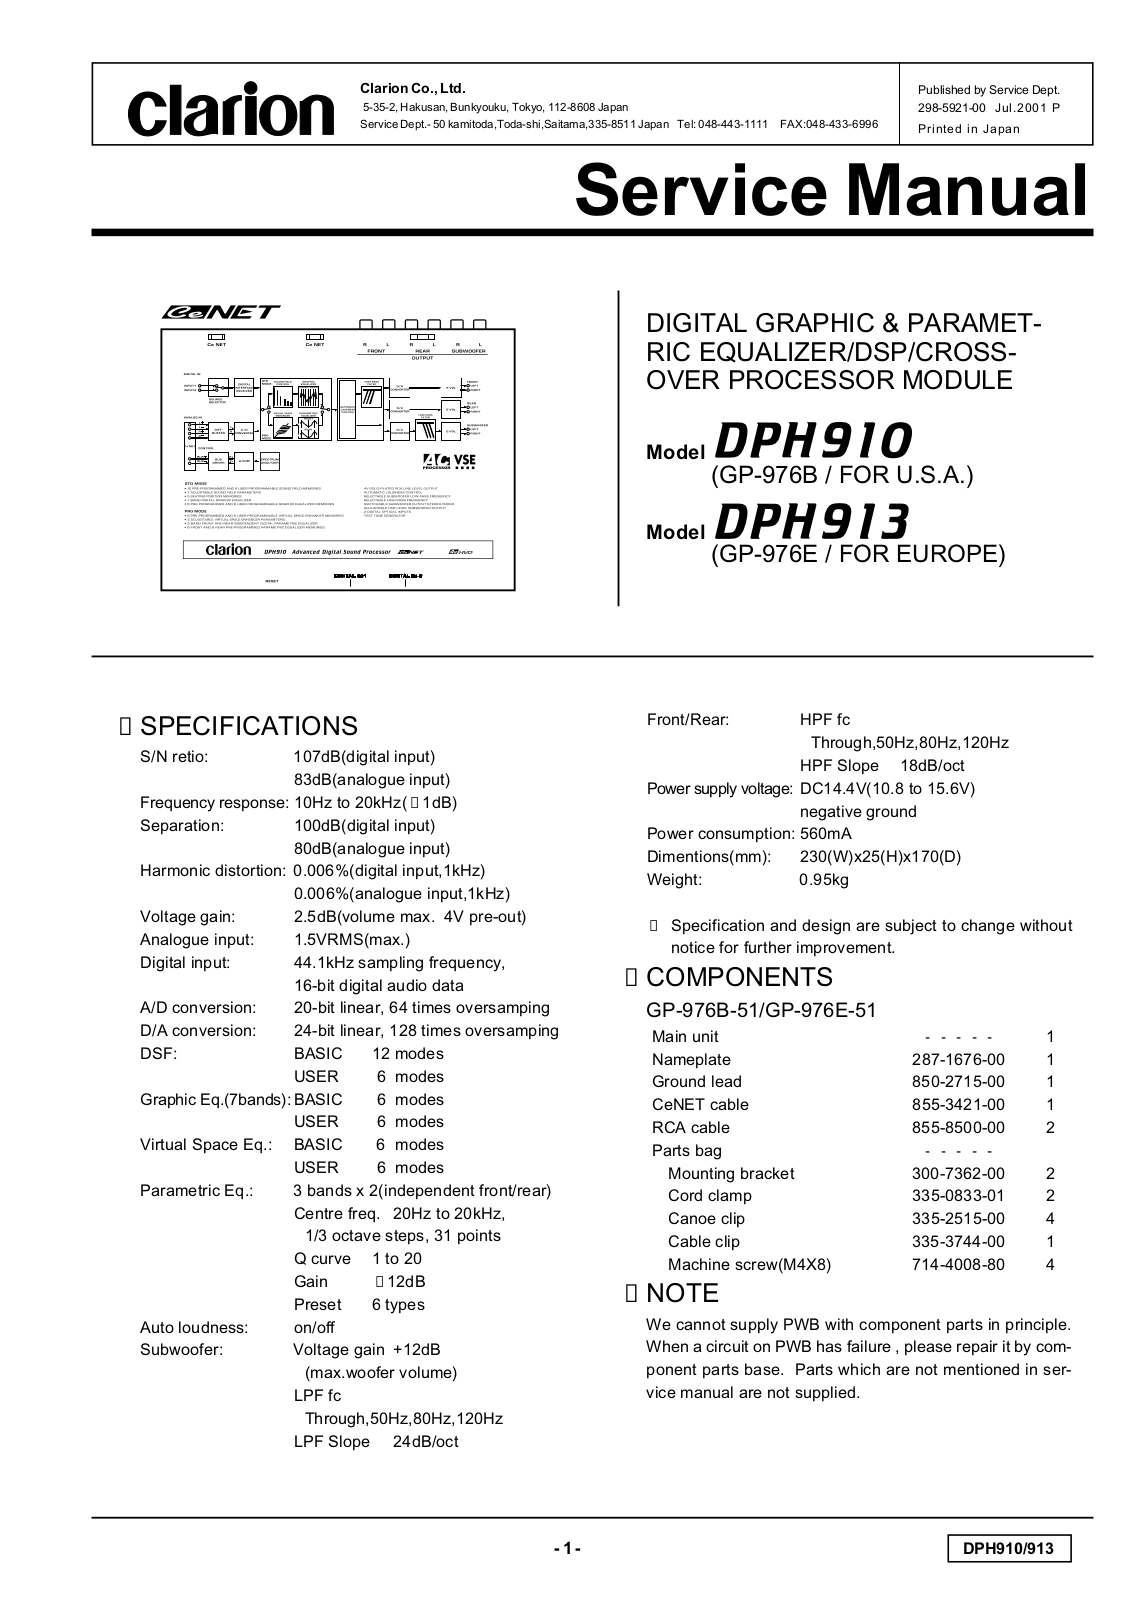 Clarion Clarion DPH910, DPH913 Service Manual